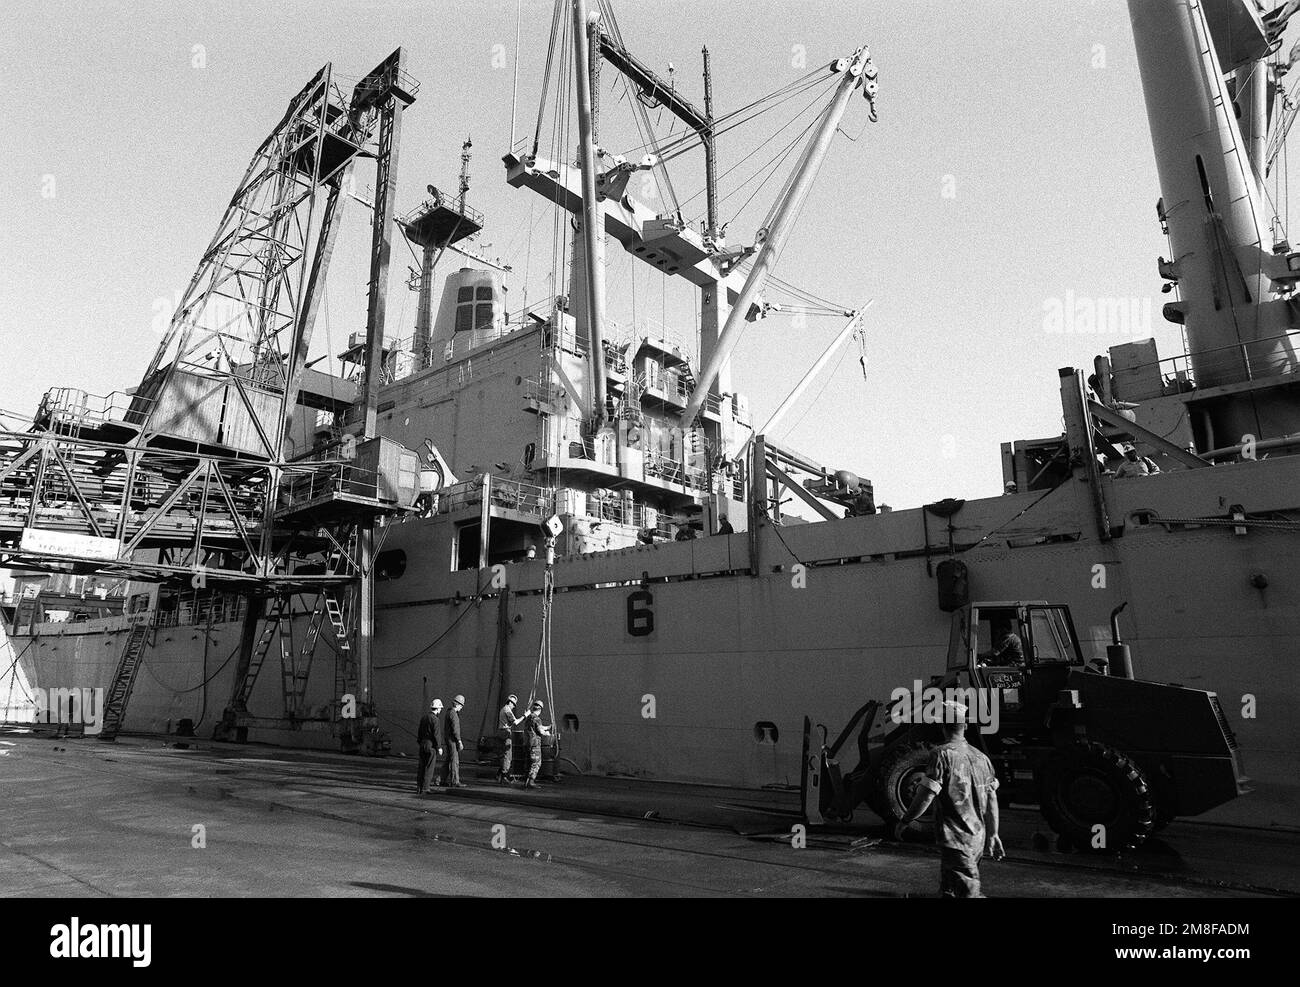 The amphibious cargo ship USS CHARLESTON (LKA-113) stands at the pier as equipment is offloaded during Operation Provide Comfort, an Allied effort to aid Kurdish refugees who fled from the forces of Saddam Hussein in northern Iraq. Subject Operation/Series: PROVIDE COMFORT Base: Iskenderum Country: Turkey (TUR) Stock Photo